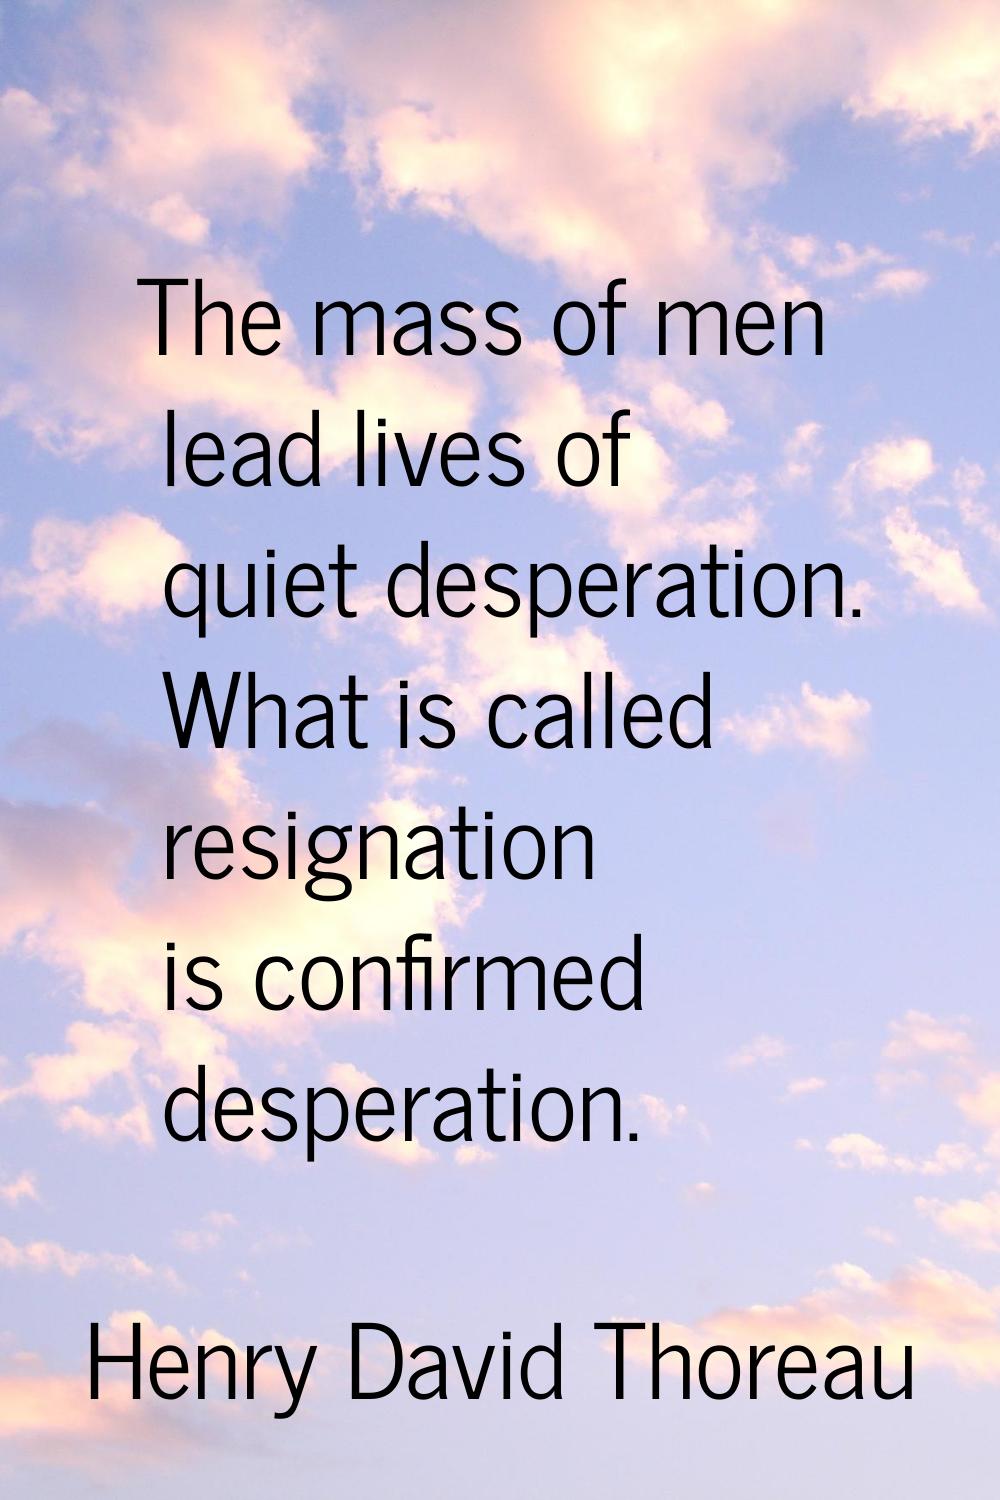 The mass of men lead lives of quiet desperation. What is called resignation is confirmed desperatio